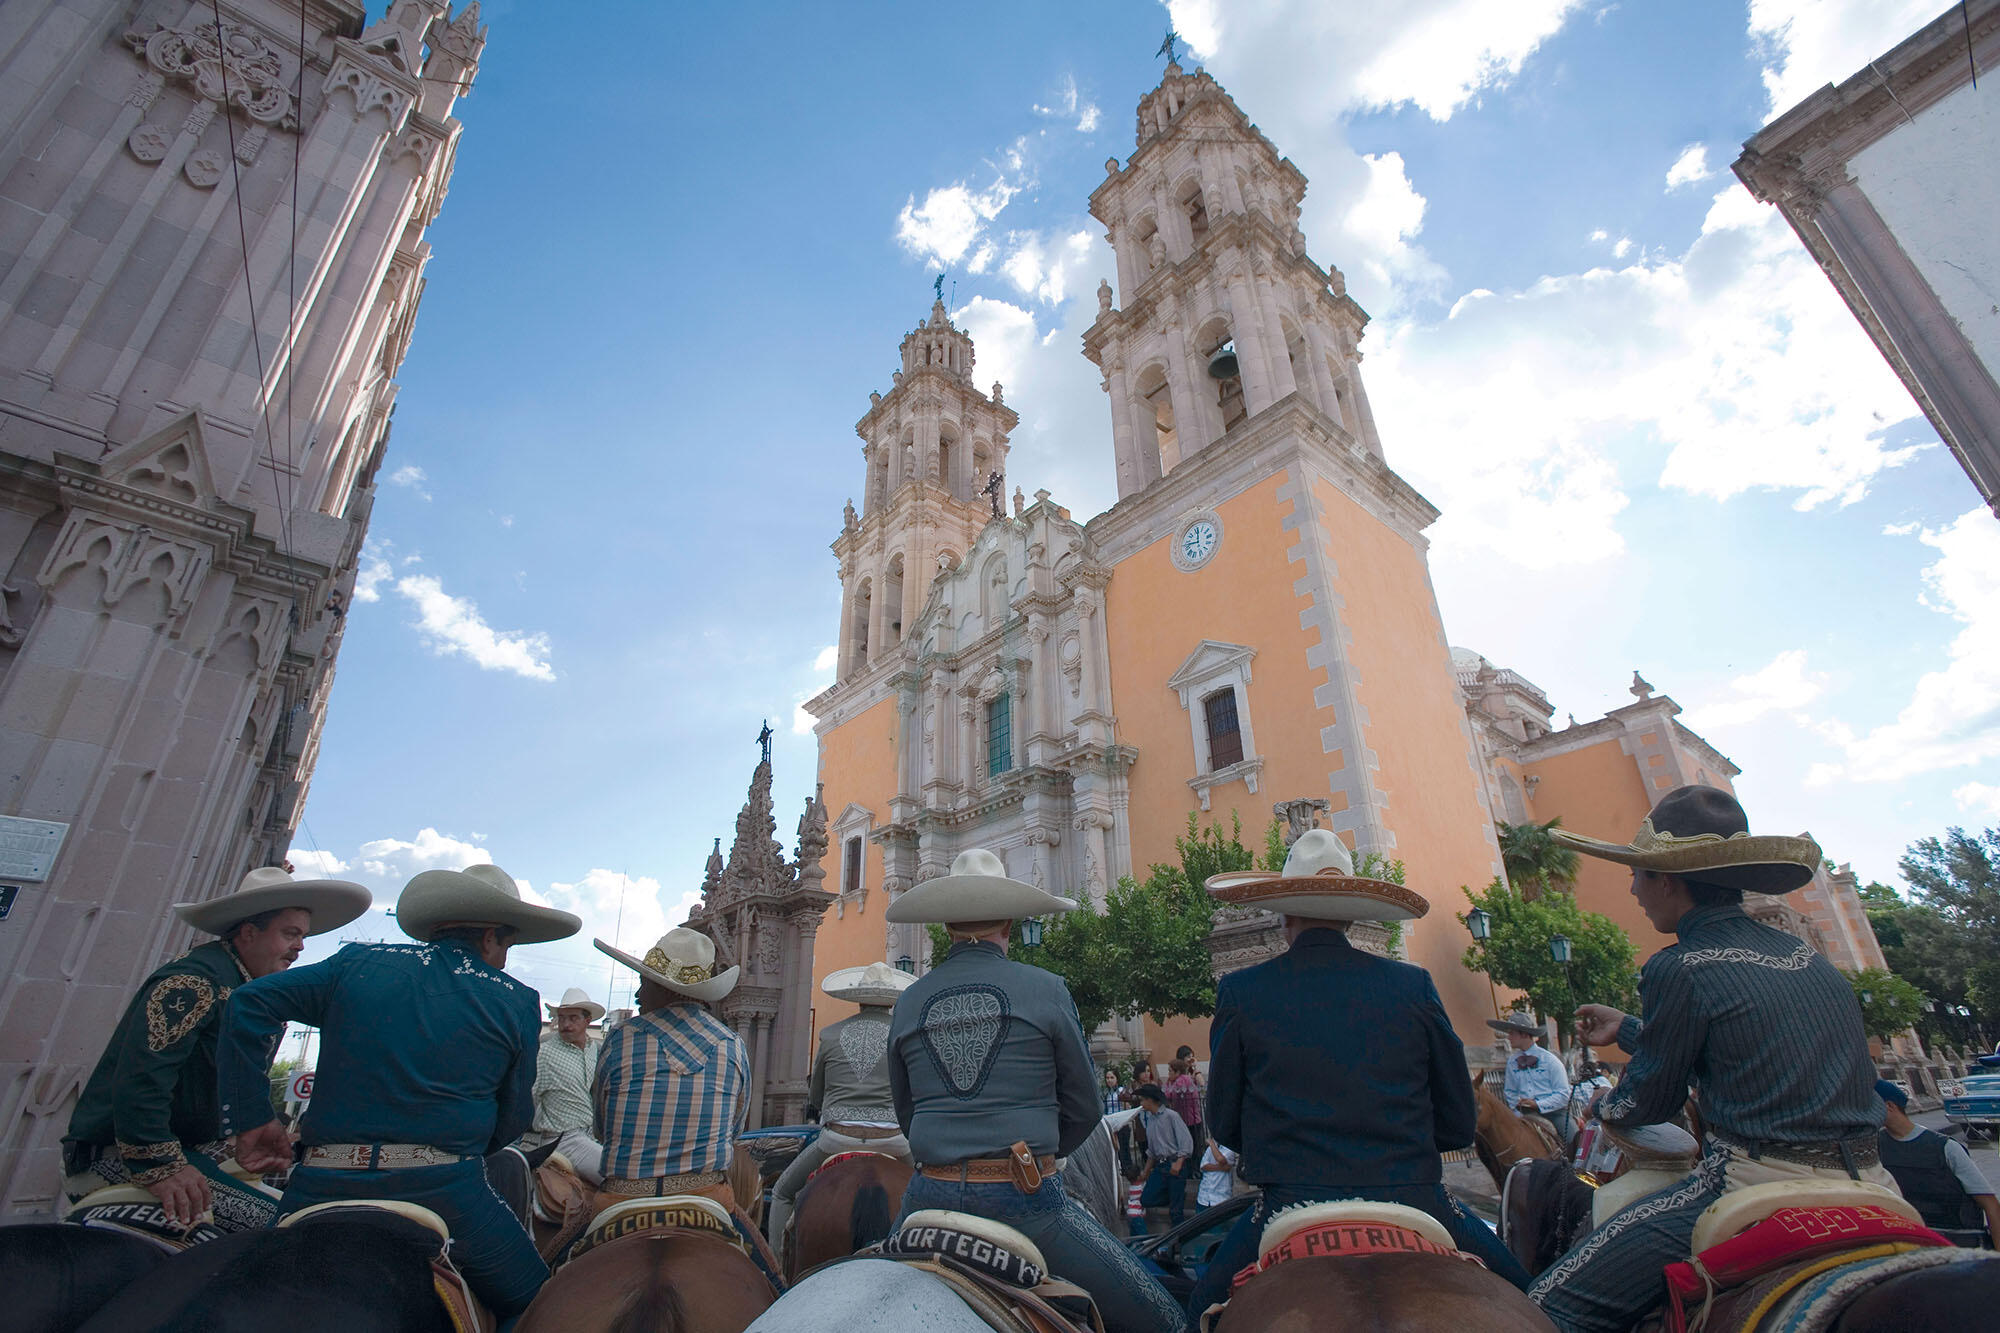 A group of Mexican cowboys, or charros, parade on horseback through the streets of Jerez, Mexico. (Photo courtesy of the Zacatecas Ministry of Tourism.)